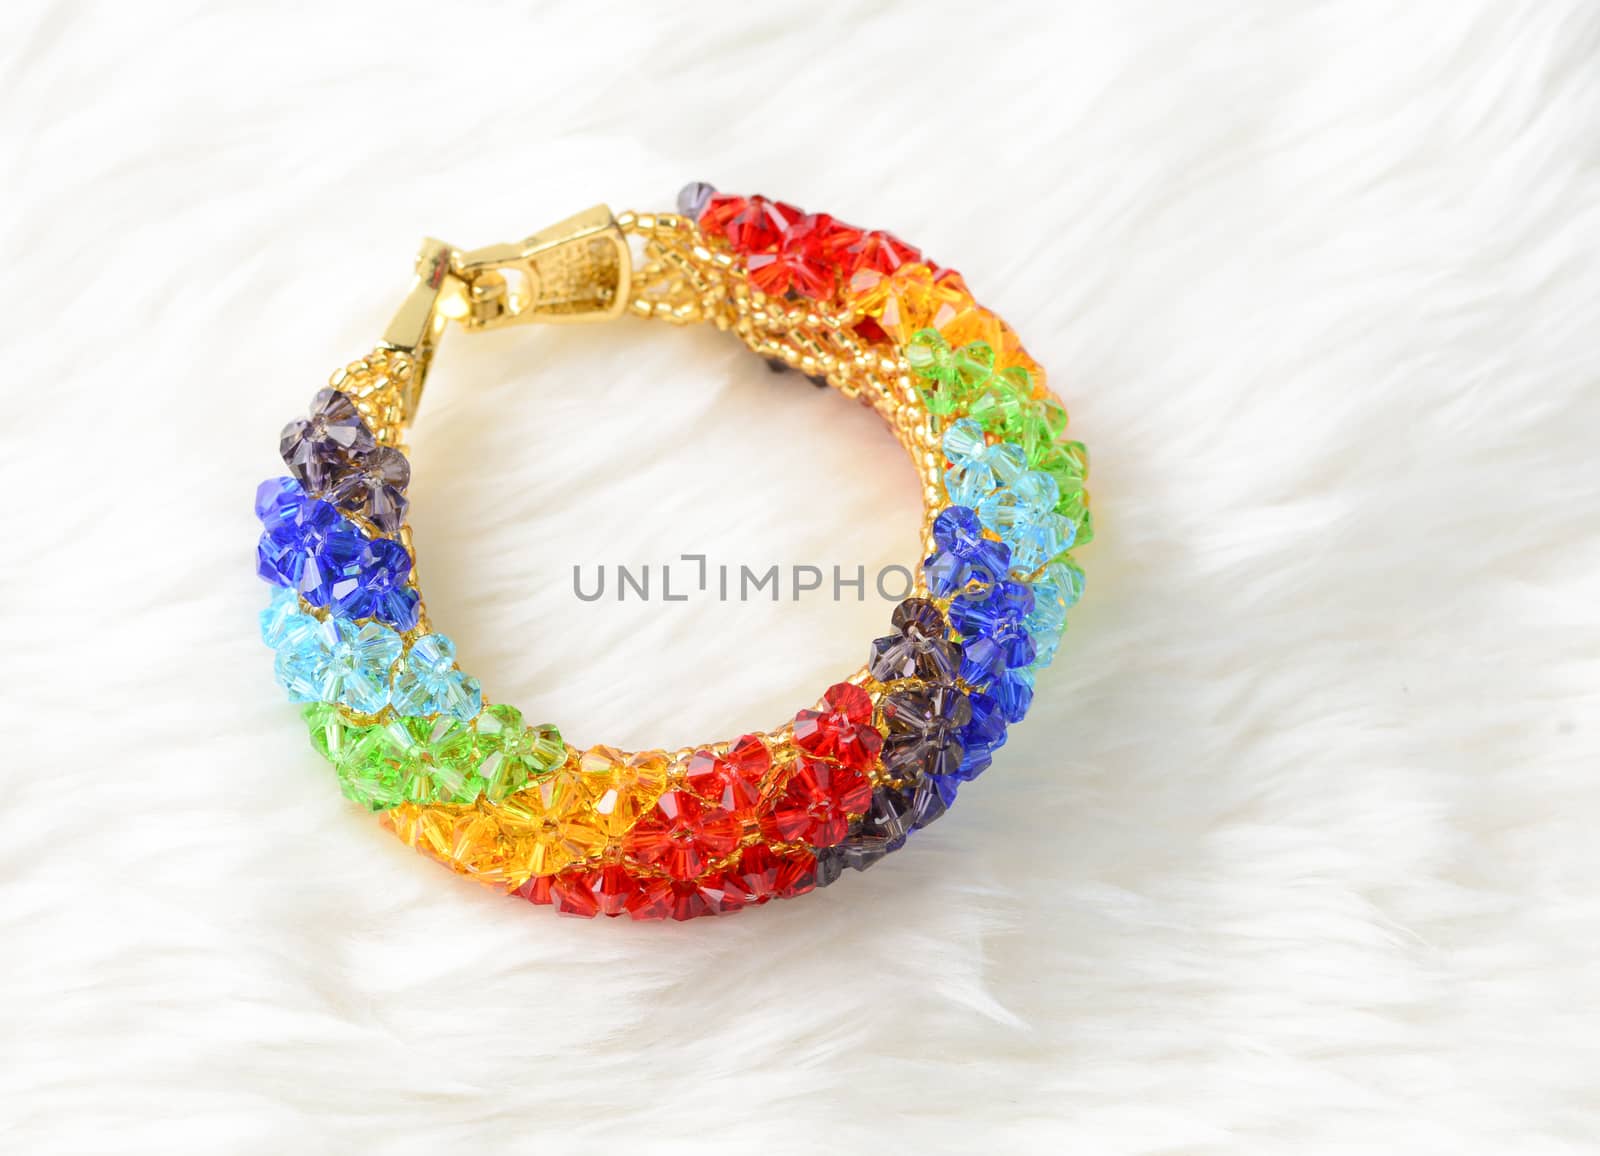 Bracelet with crystal on white background by yuiyuize